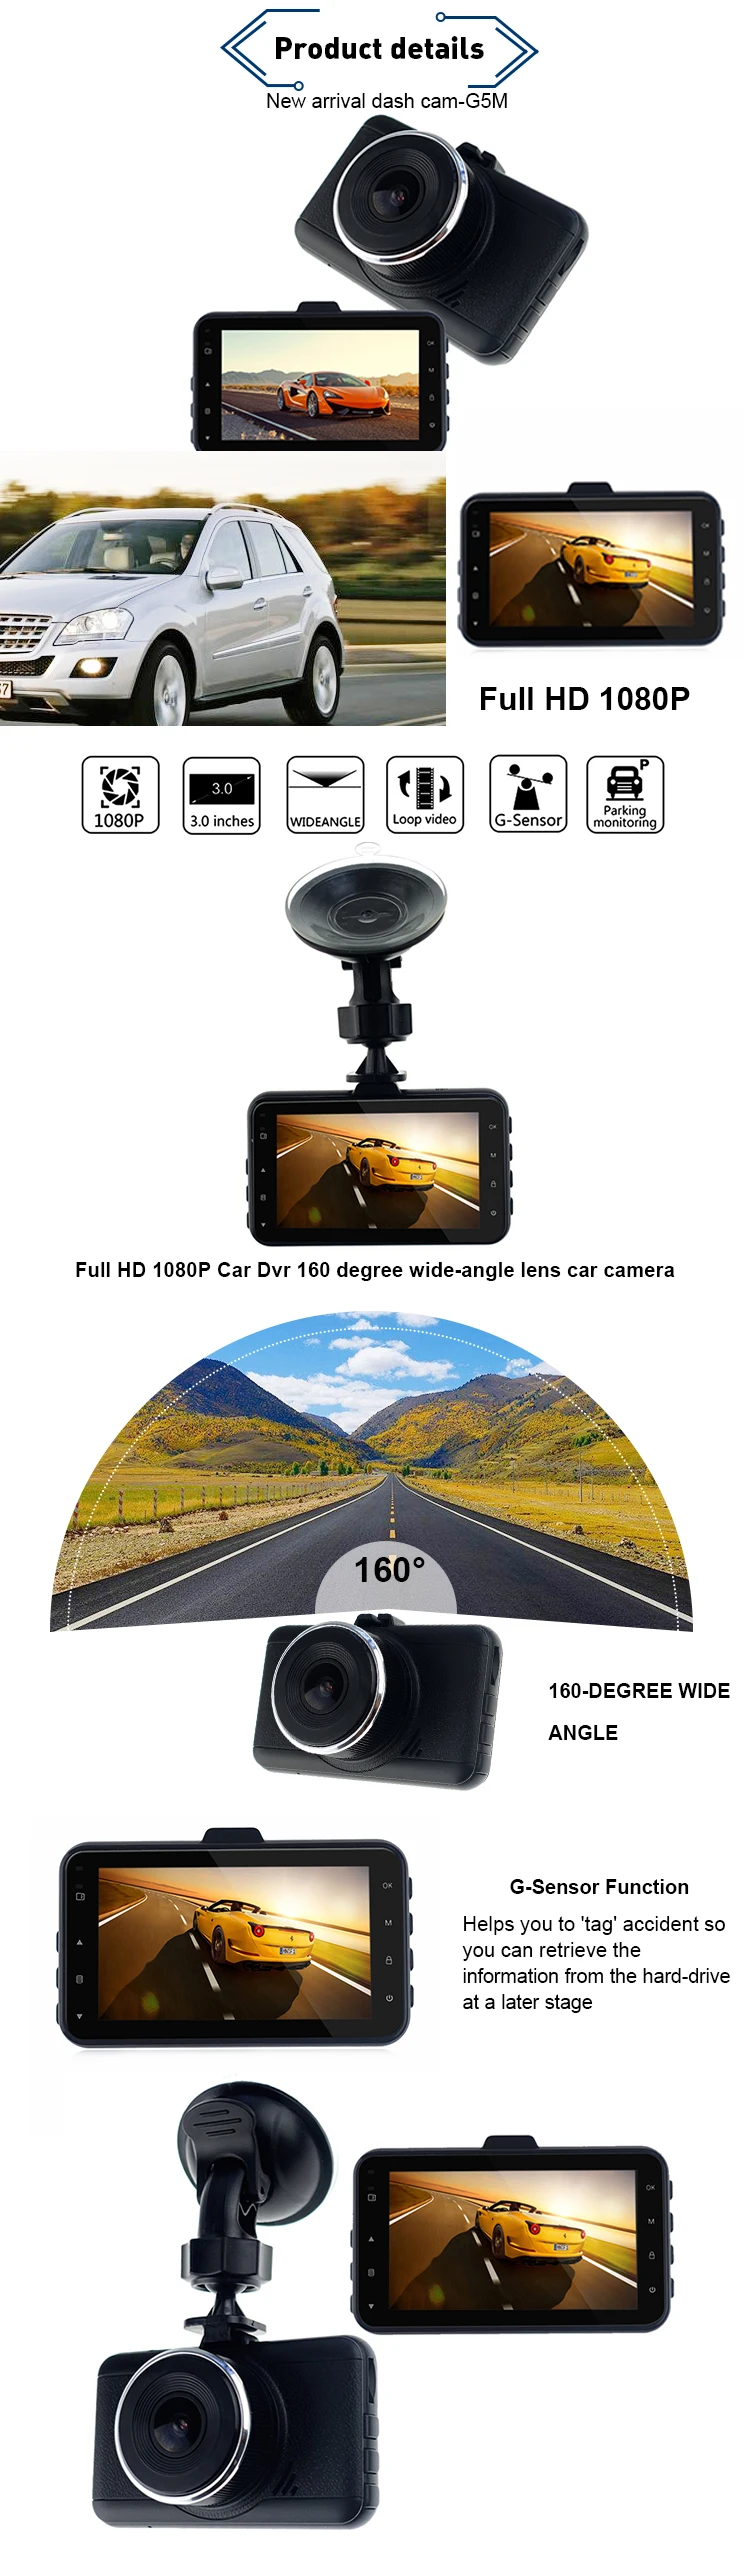 Android mirror car dvr rearview camera system best dash cam gps navigation for bmw x1